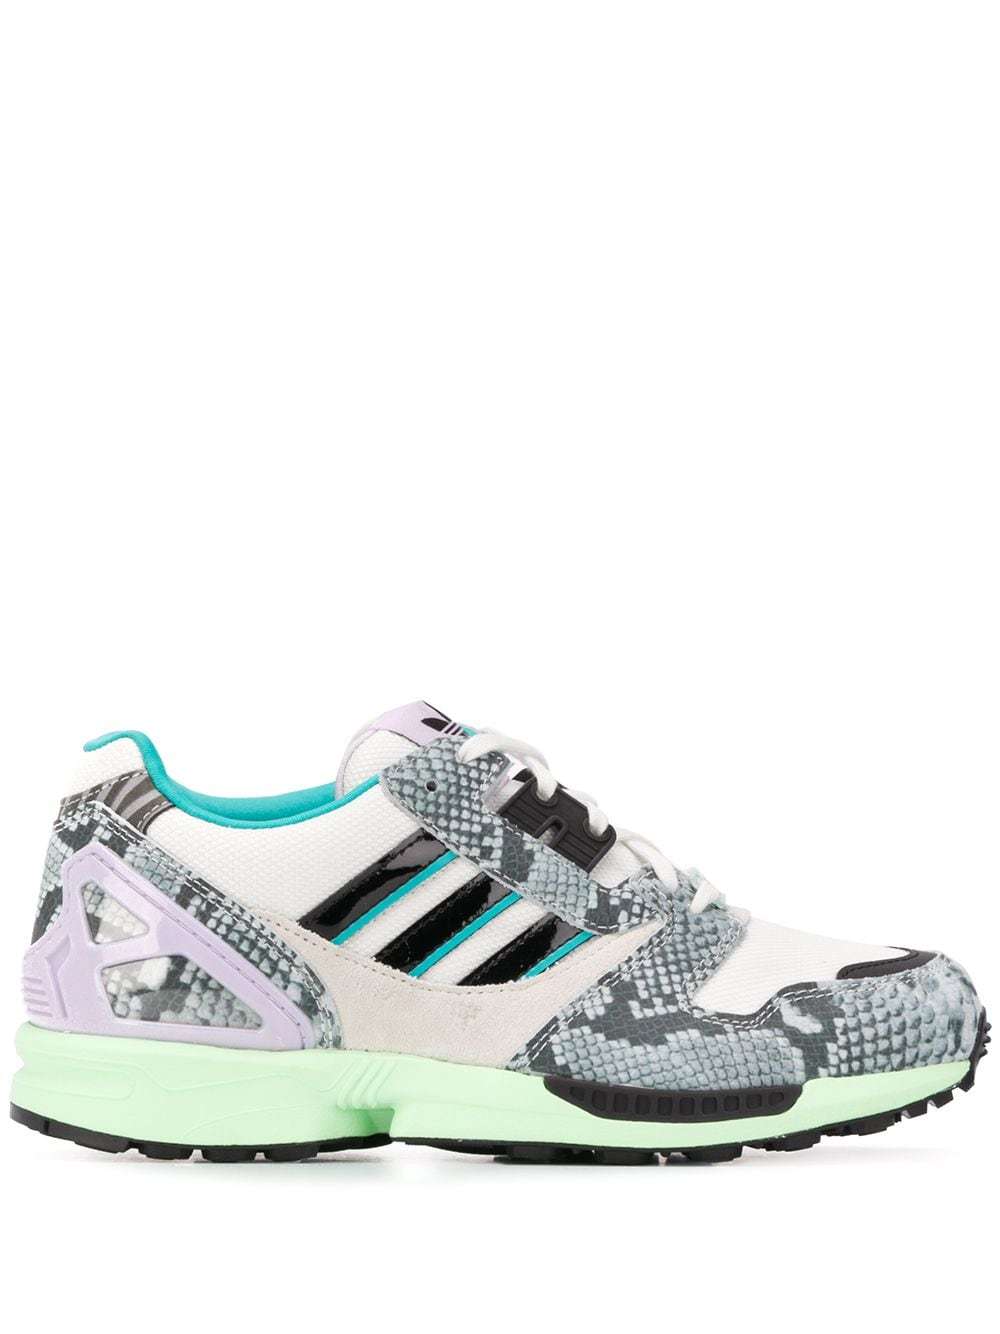 adidas Zx 8000 Lethal Nights Sneakers, $123 | farfetch.com | Lookastic